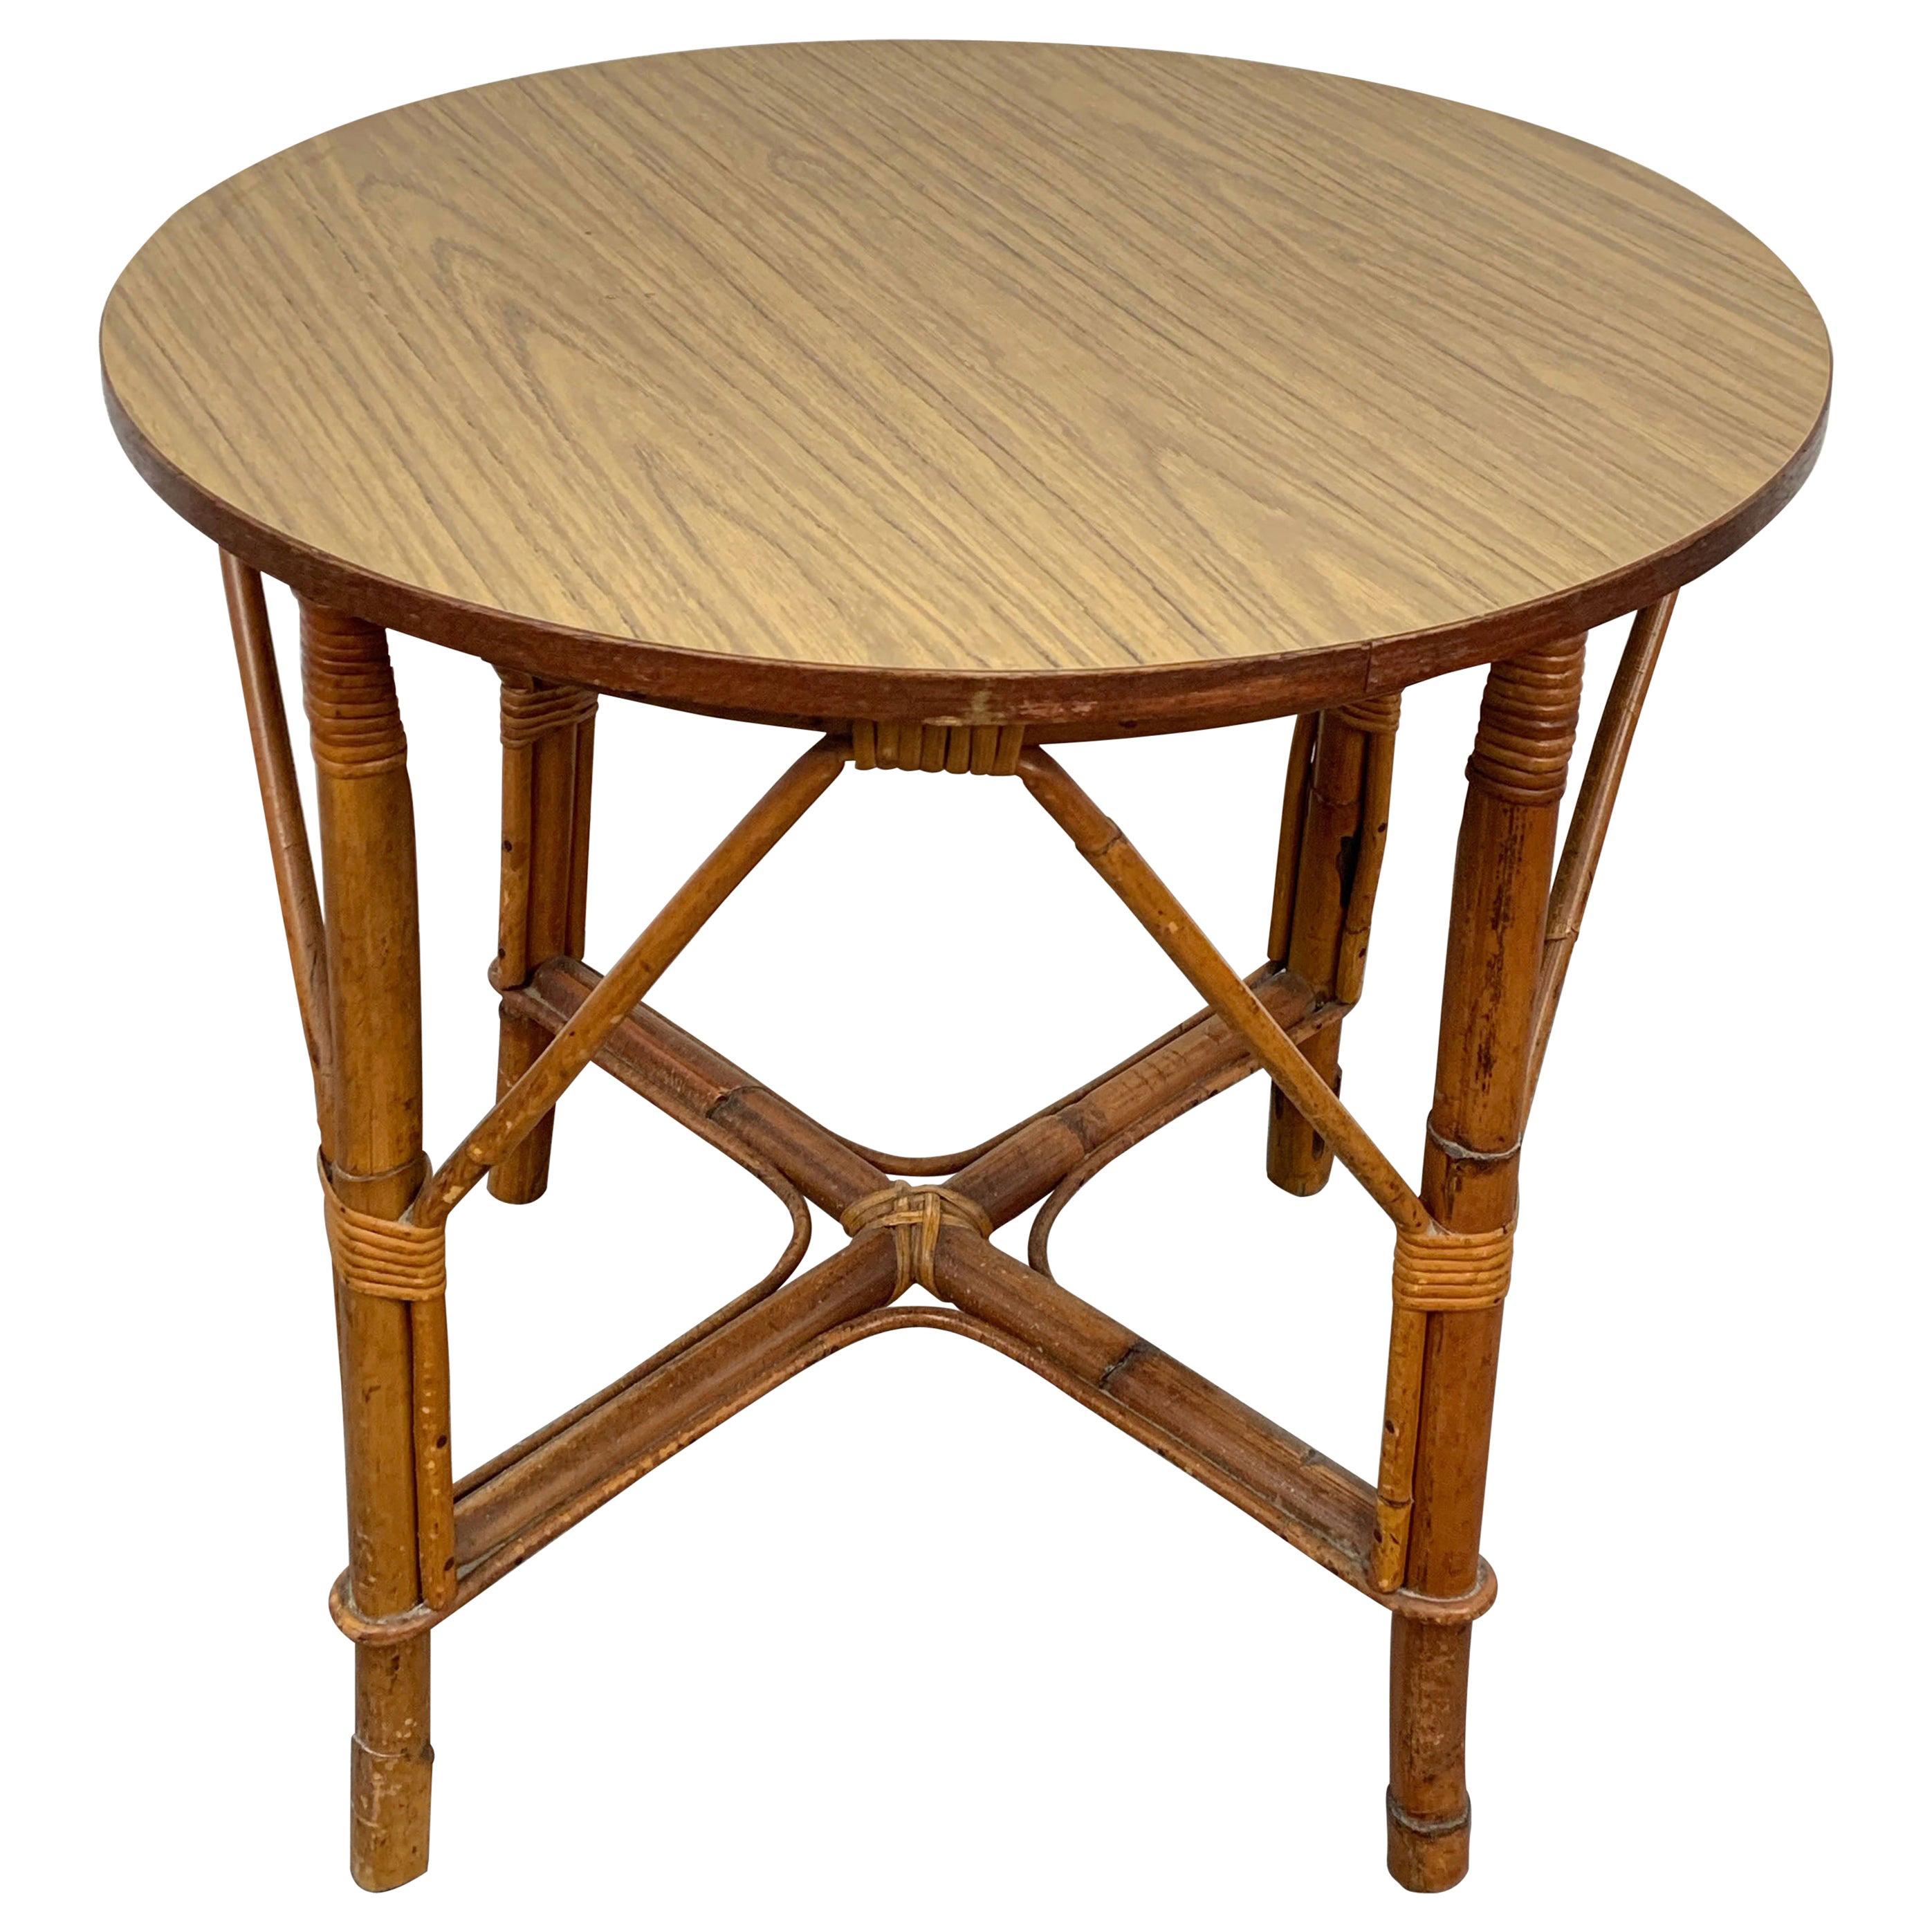 Round Midcentury Bamboo Rattan Italian Coffee Table with Laminated Top, 1960s